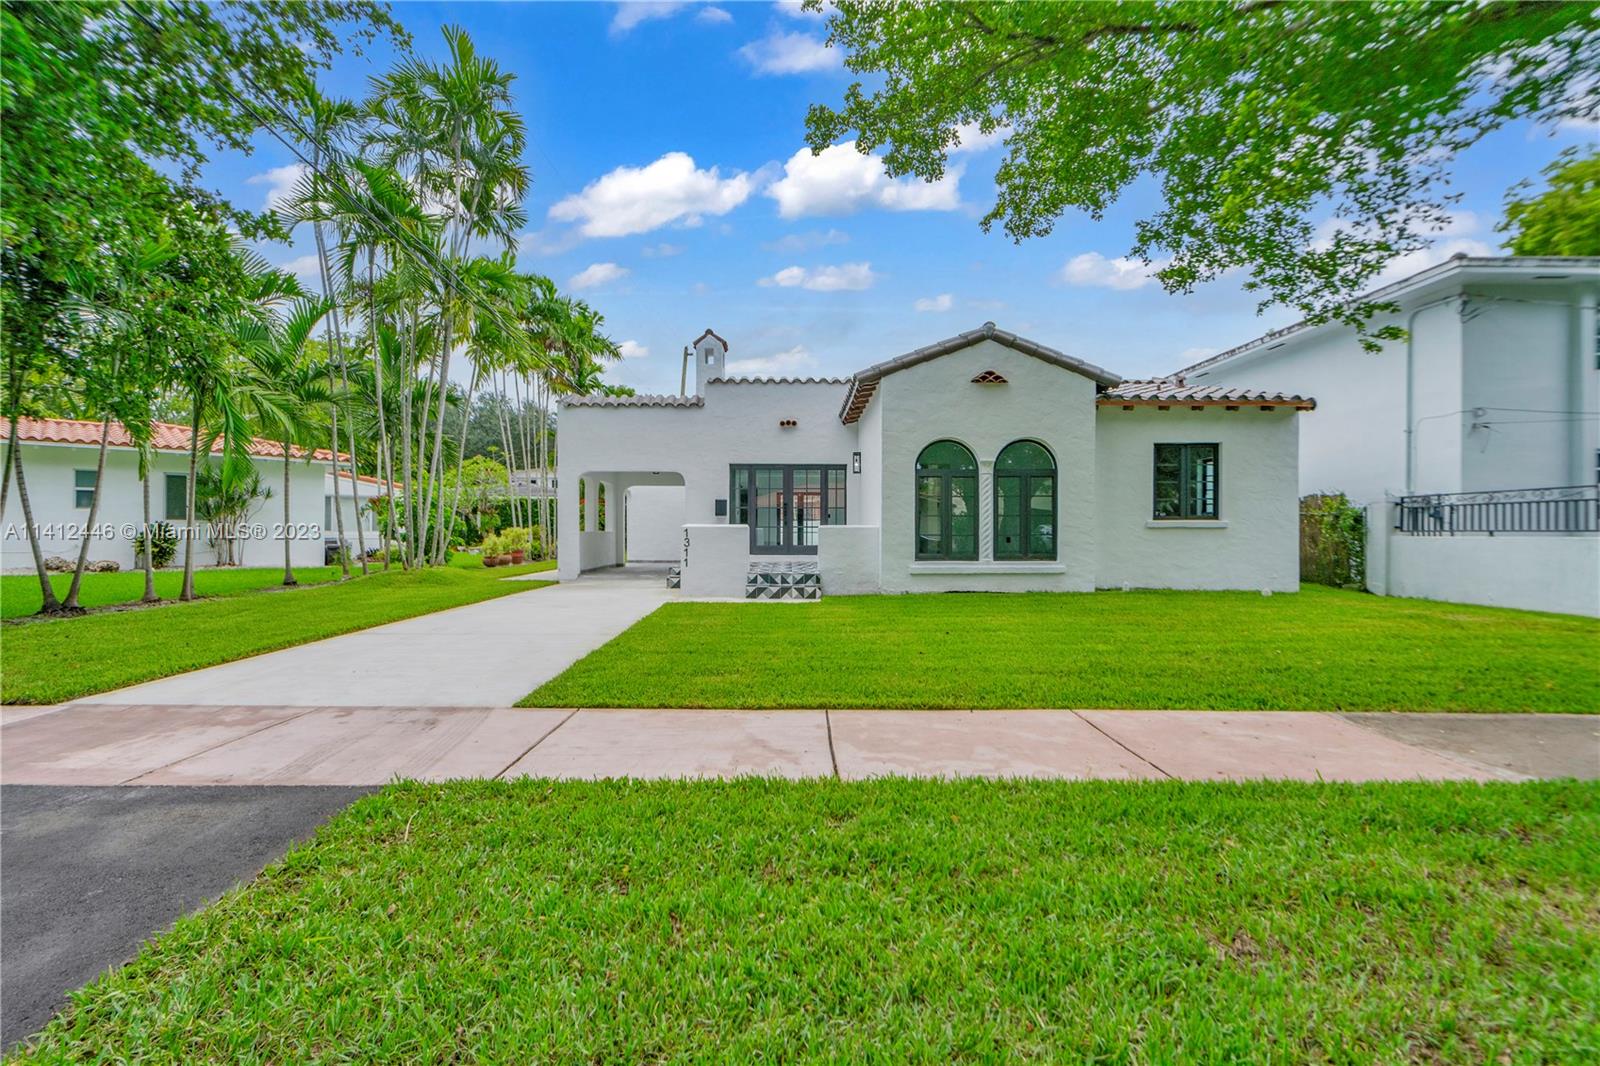 Elegant Spanish style home in the much sought after city of Coral Gables.Declared historic,it has gone through a
comprehensive renovation process,which can be verified in the plans.Everything is new including reinforced
walls,new roof,electricity,plumbing,AC,impact windows & doors.The Colonial style design maintains its original
architecture on the outside,inside it boasts a modern design,providing a contrast between the old & the
new.Covered with 24x48 porcelain tile,Italian kitchen,luxury appliances,wi fi connection,high quality internal
doors,switches & power outlets,paired with the home's lighting fixtures,electronic lock,smart thermostat, that
can connect with the virtual assistant.Featuring 2279 sq ft of luxury living,3 bedrooms,3 bathroom home with a
Den,carport & fireplace.